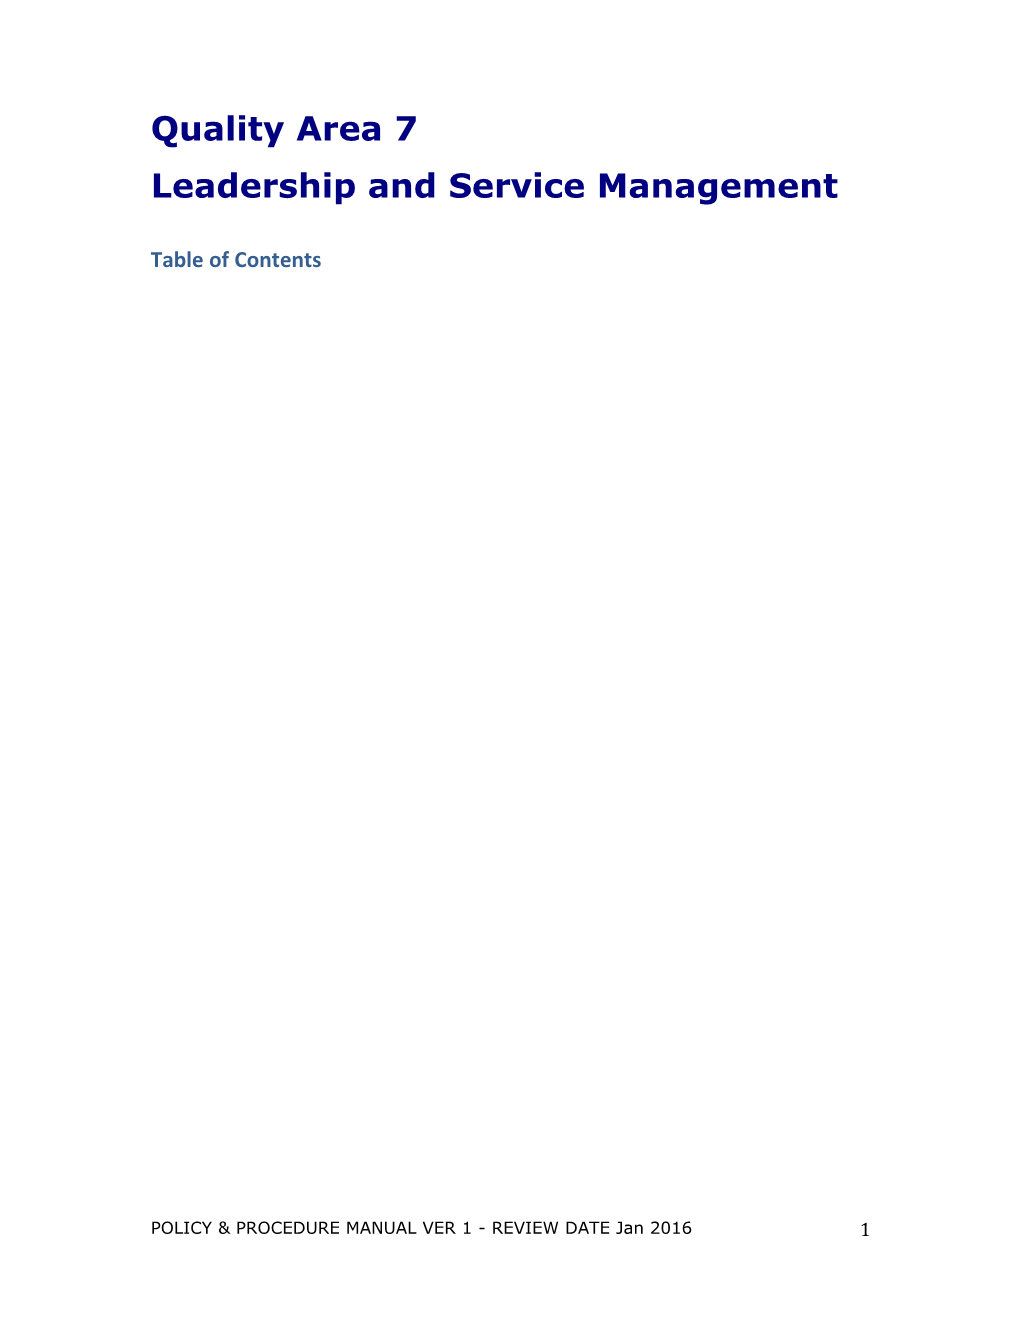 Leadership and Service Management